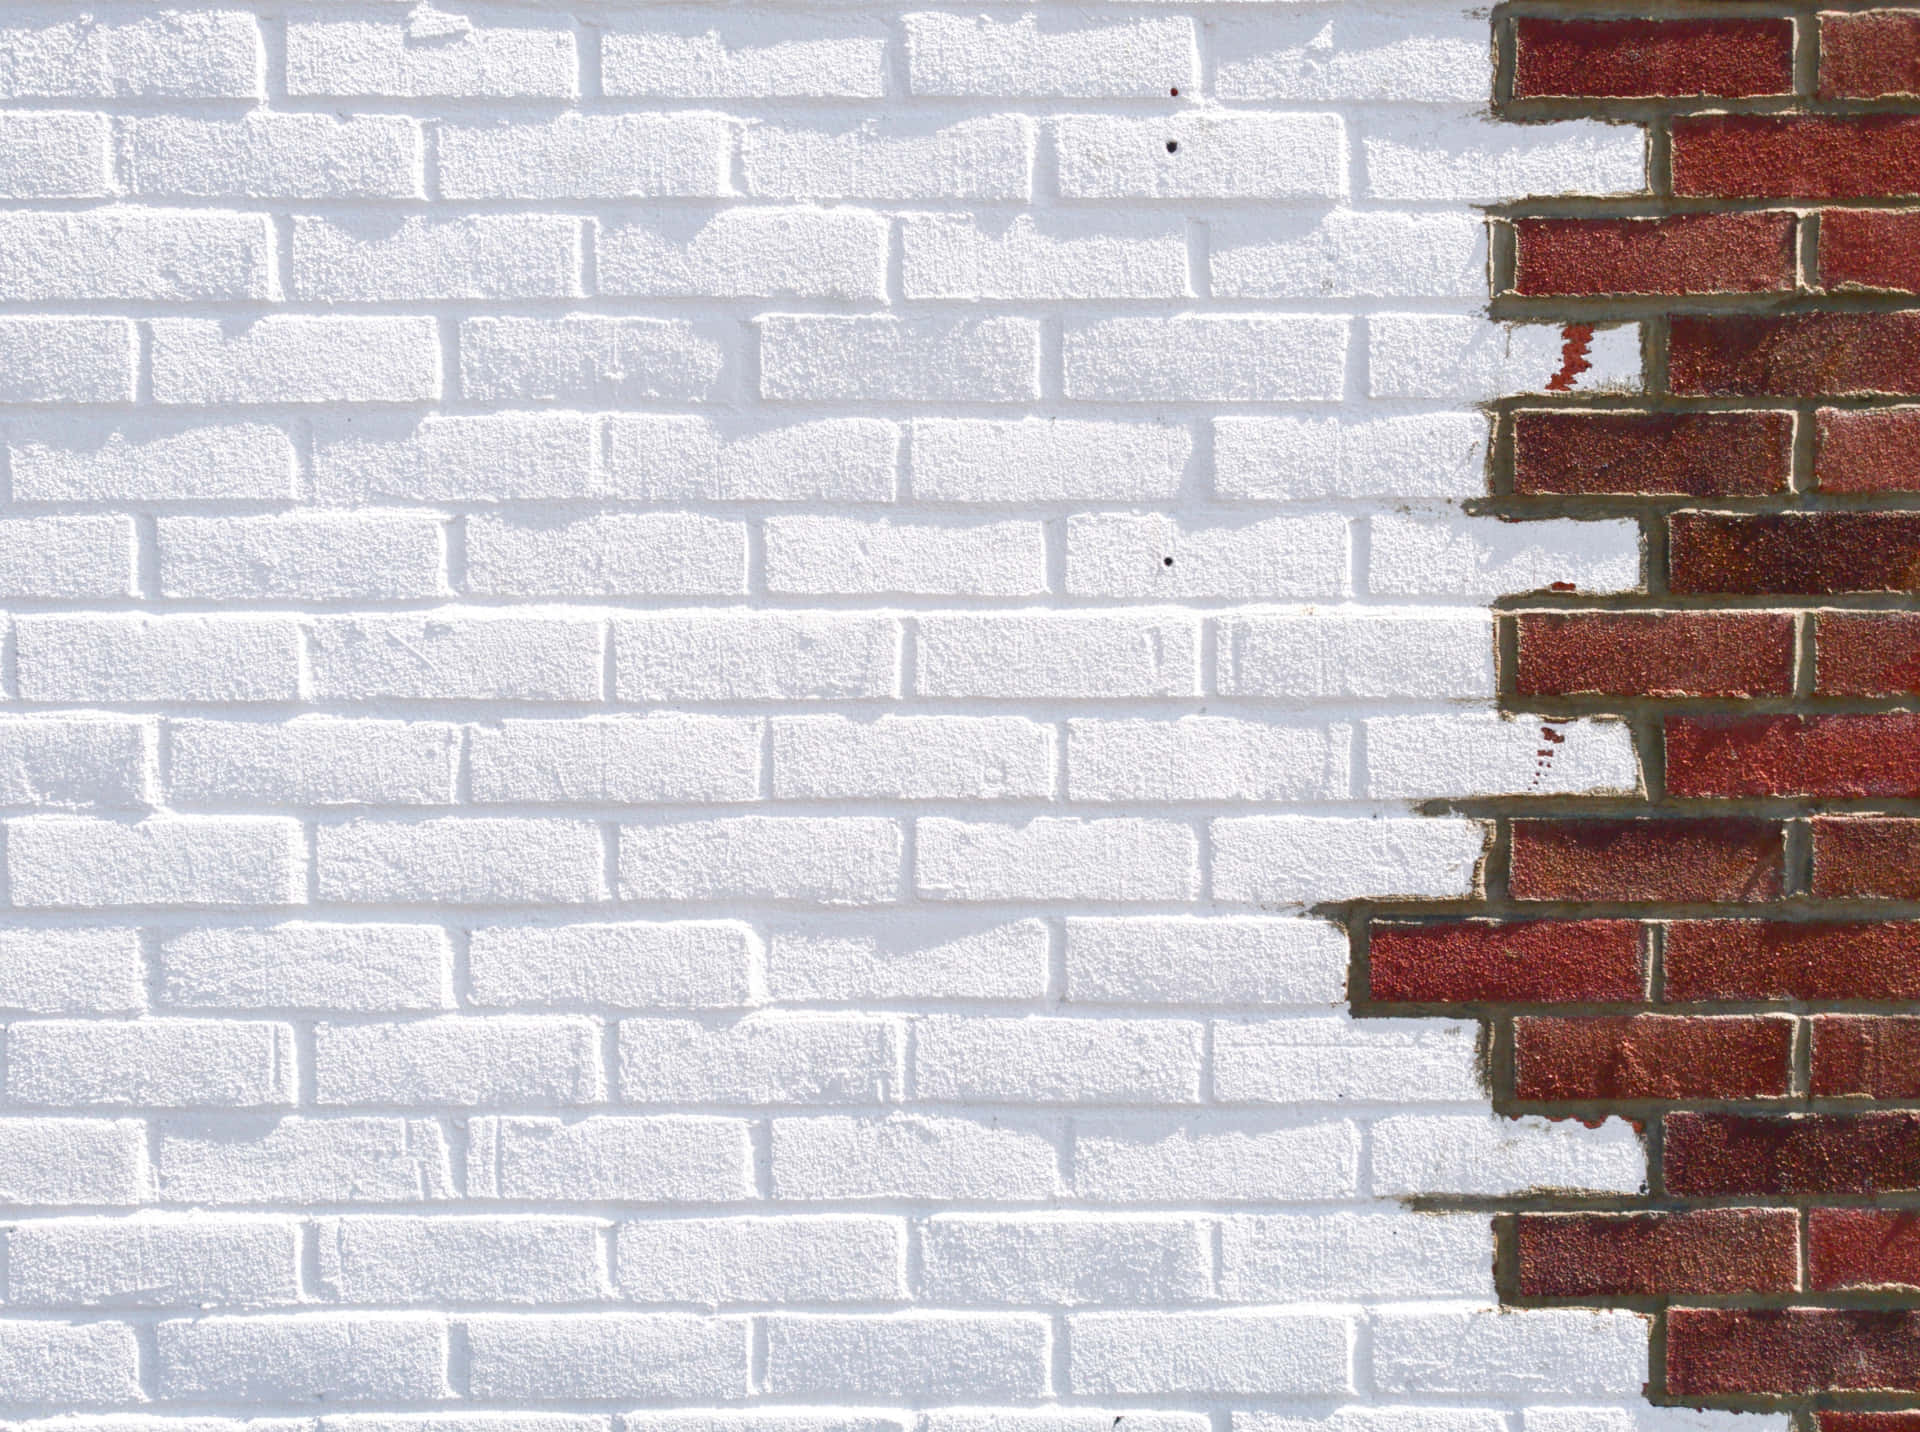 A Brick Wall With A White And Red Brick